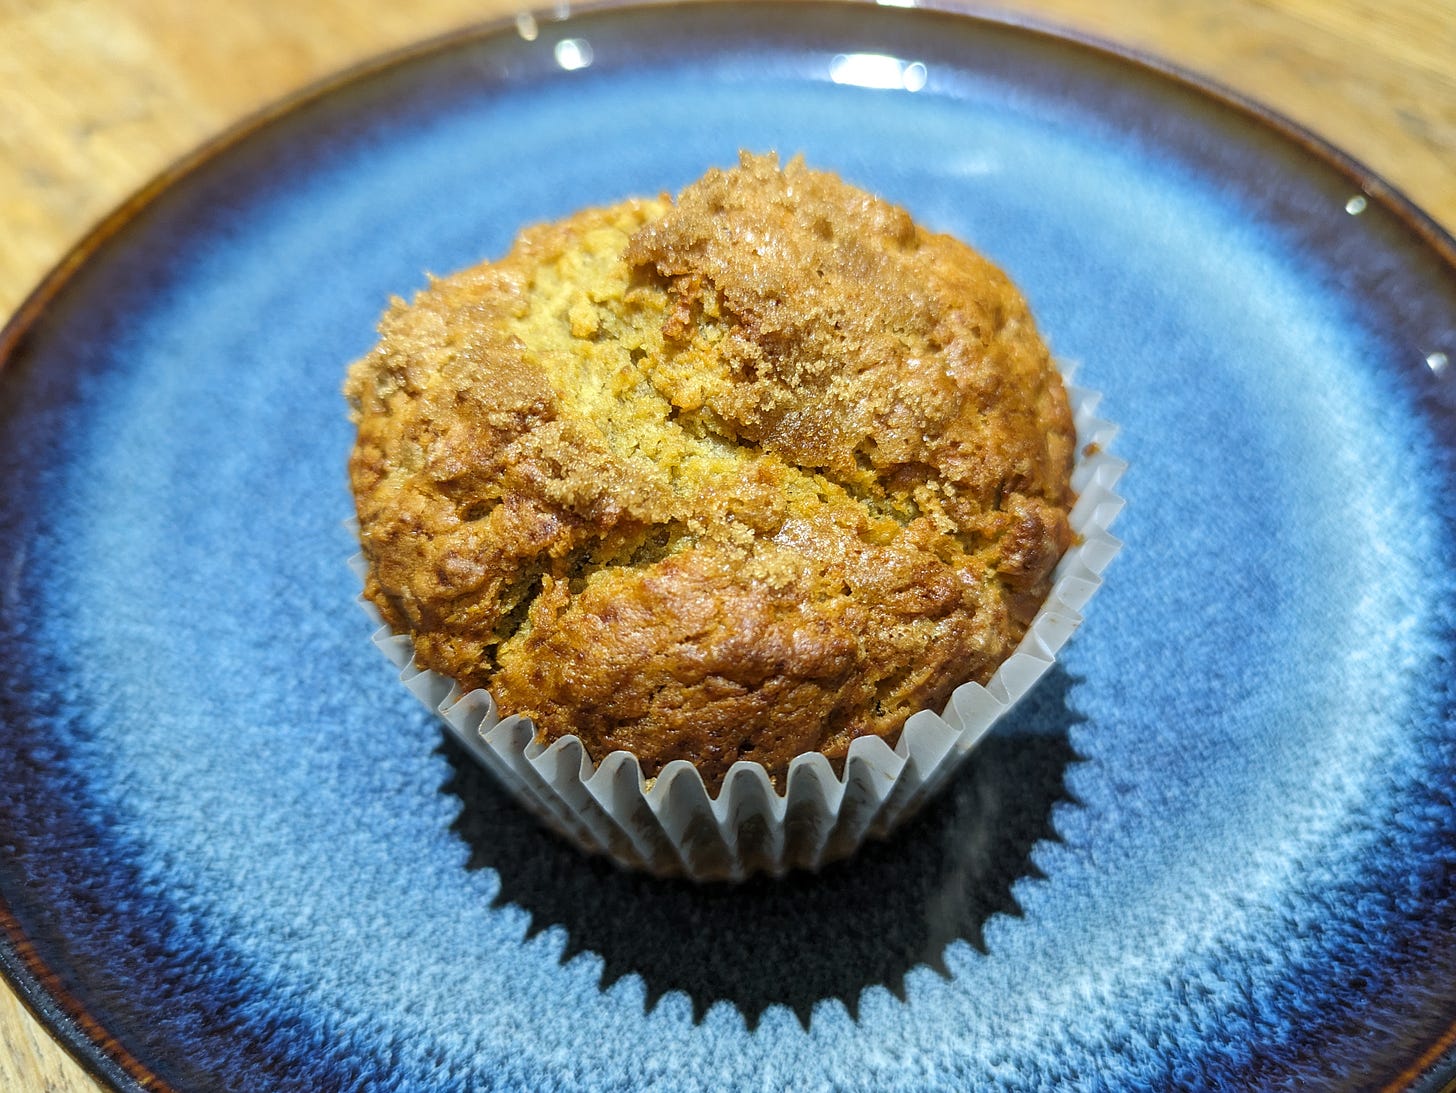 photograph of a muffin made with Kousa berries